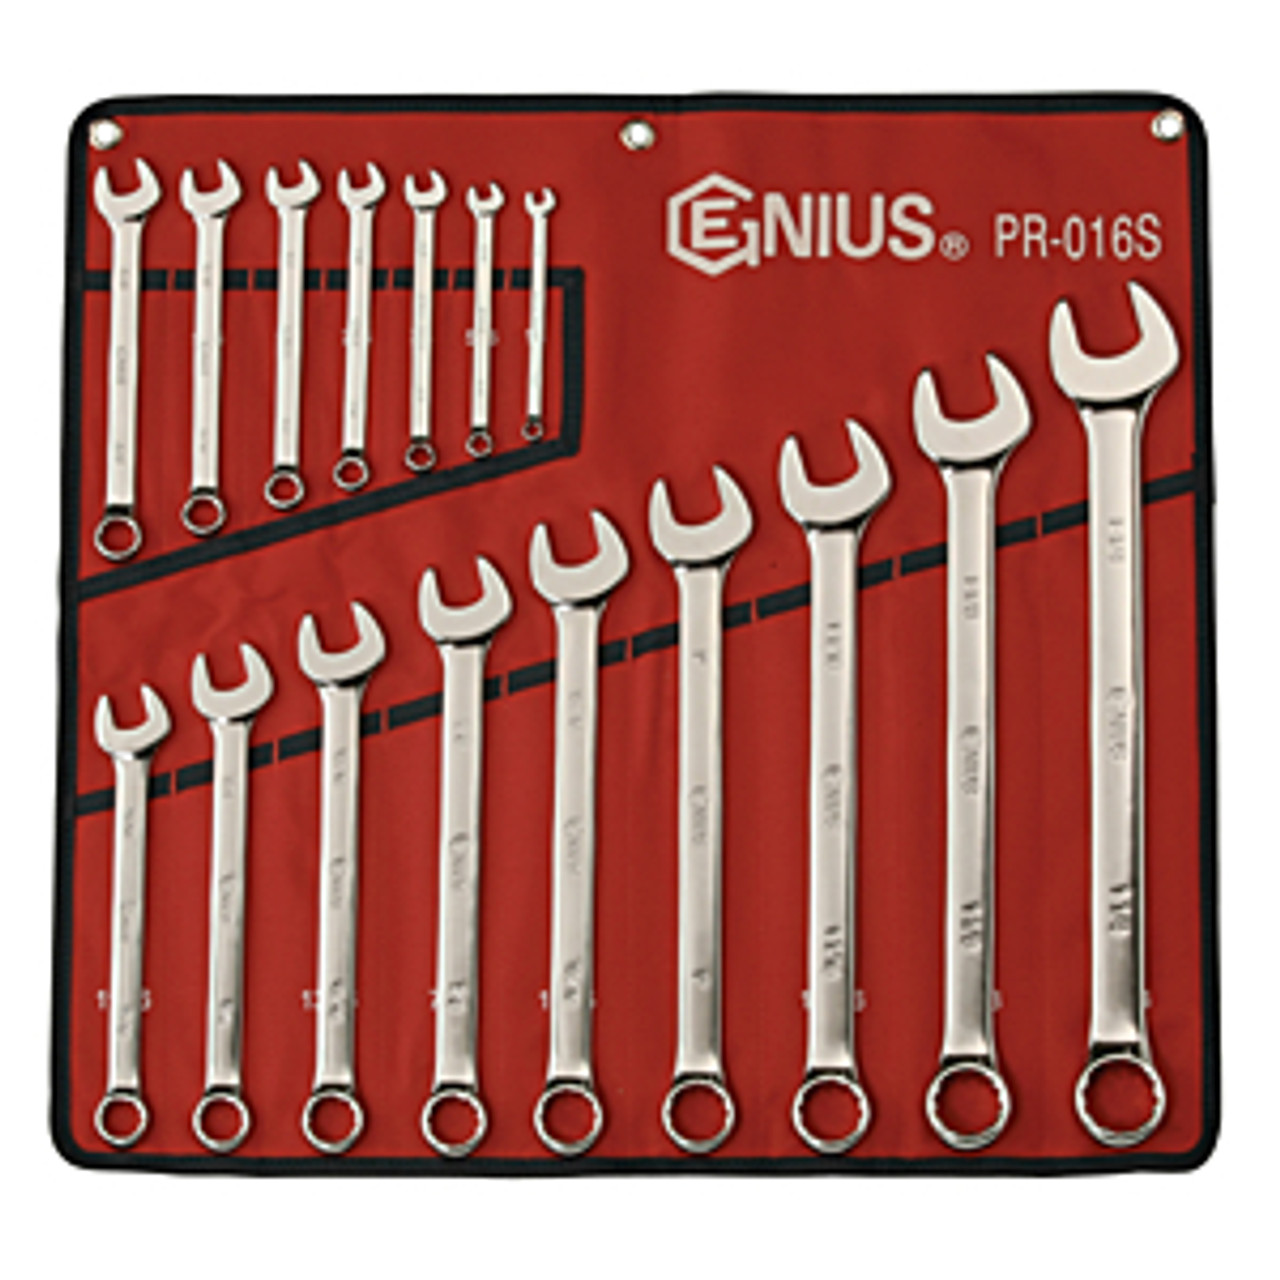 16 Piece Fractional Chrome Combination Wrench Set with Kit Bag GNSPR016S